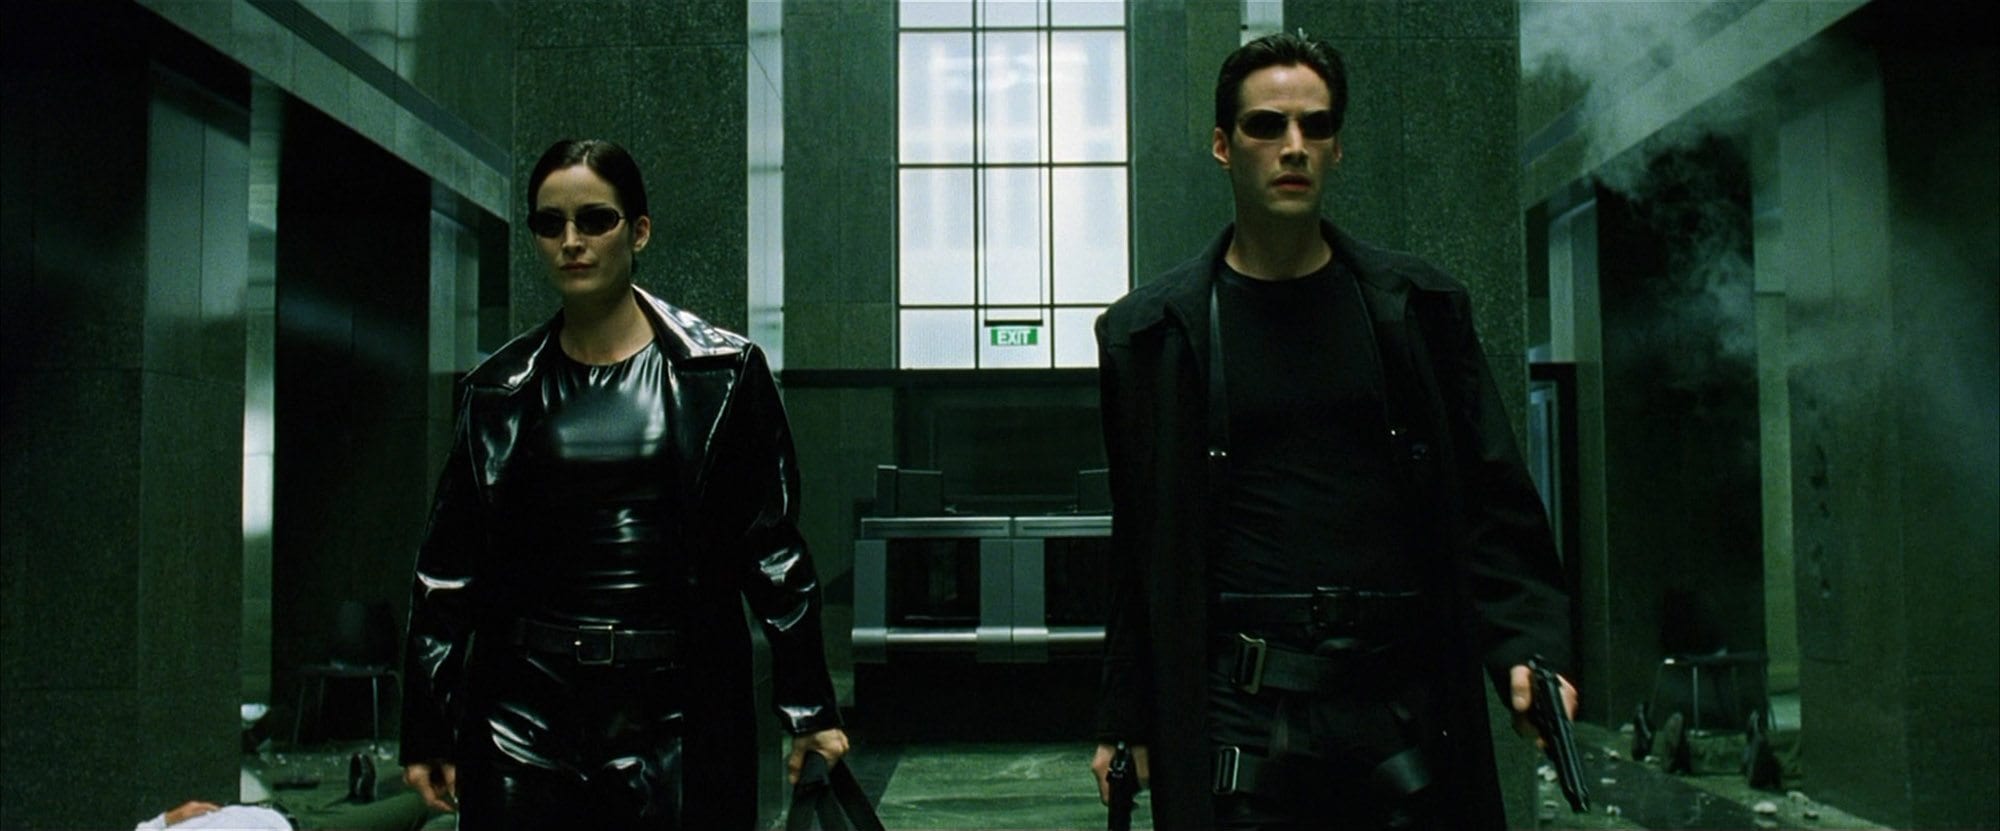 To mark 'The Matrix''s 20th anniversary, we celebrate the franchise by ranking its top ten most ferocious fight scenes. "Guns – lots of guns."